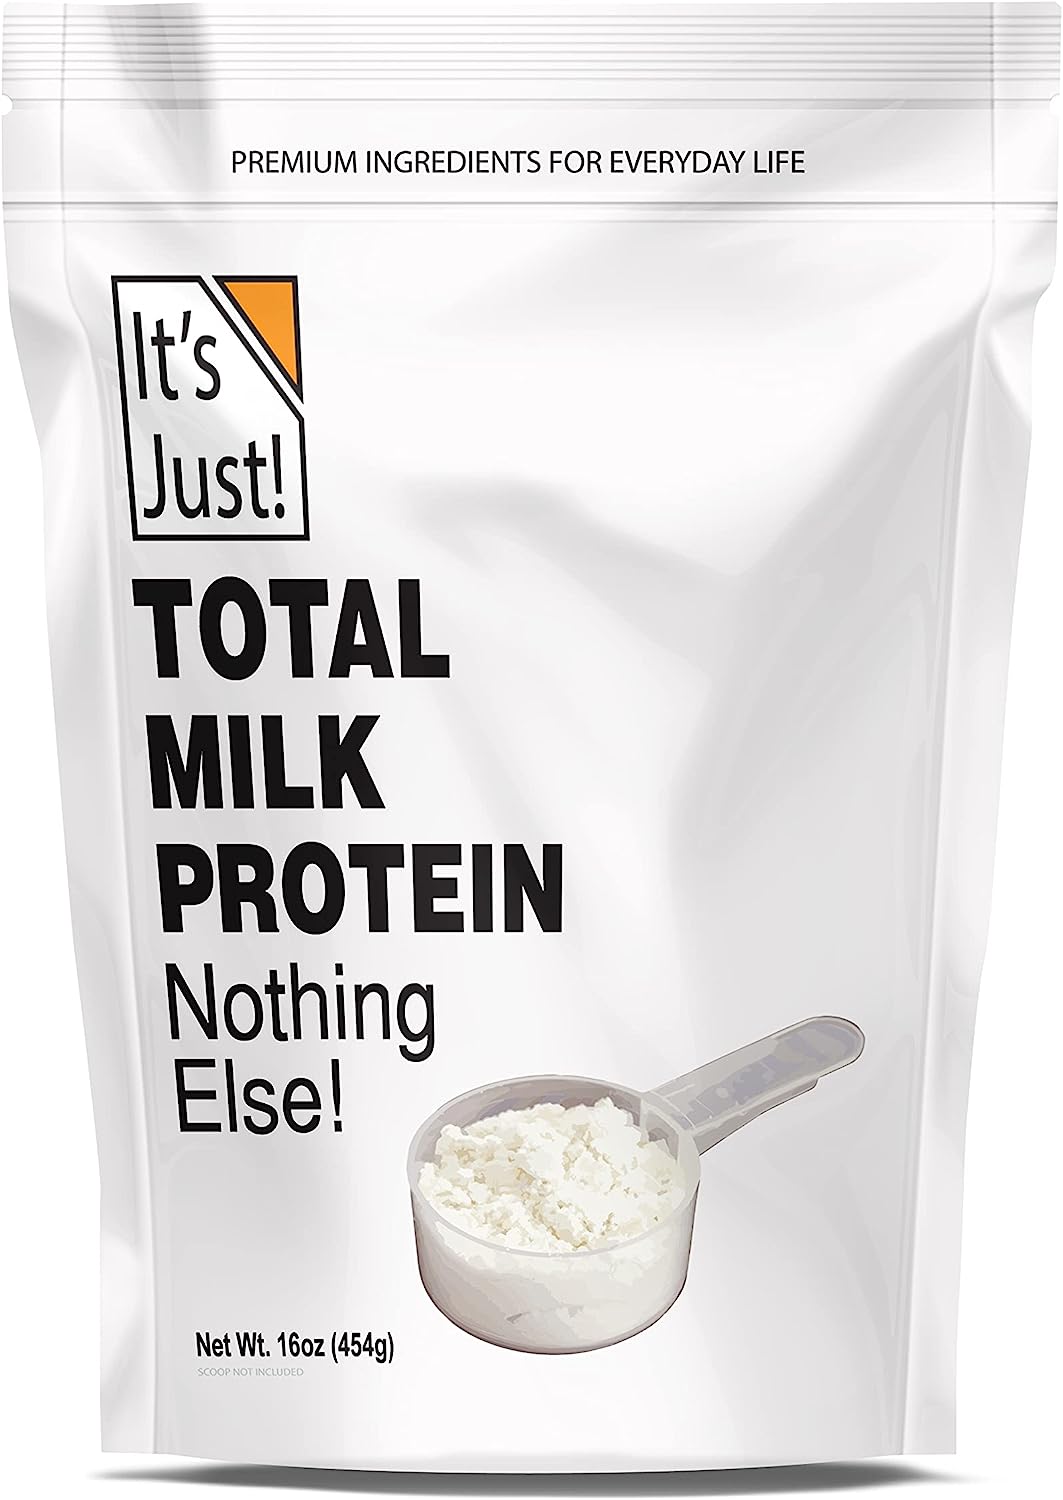 It's Just! - Milk Protein Concentrate, 1lb Bag, Contains 80% Casein /